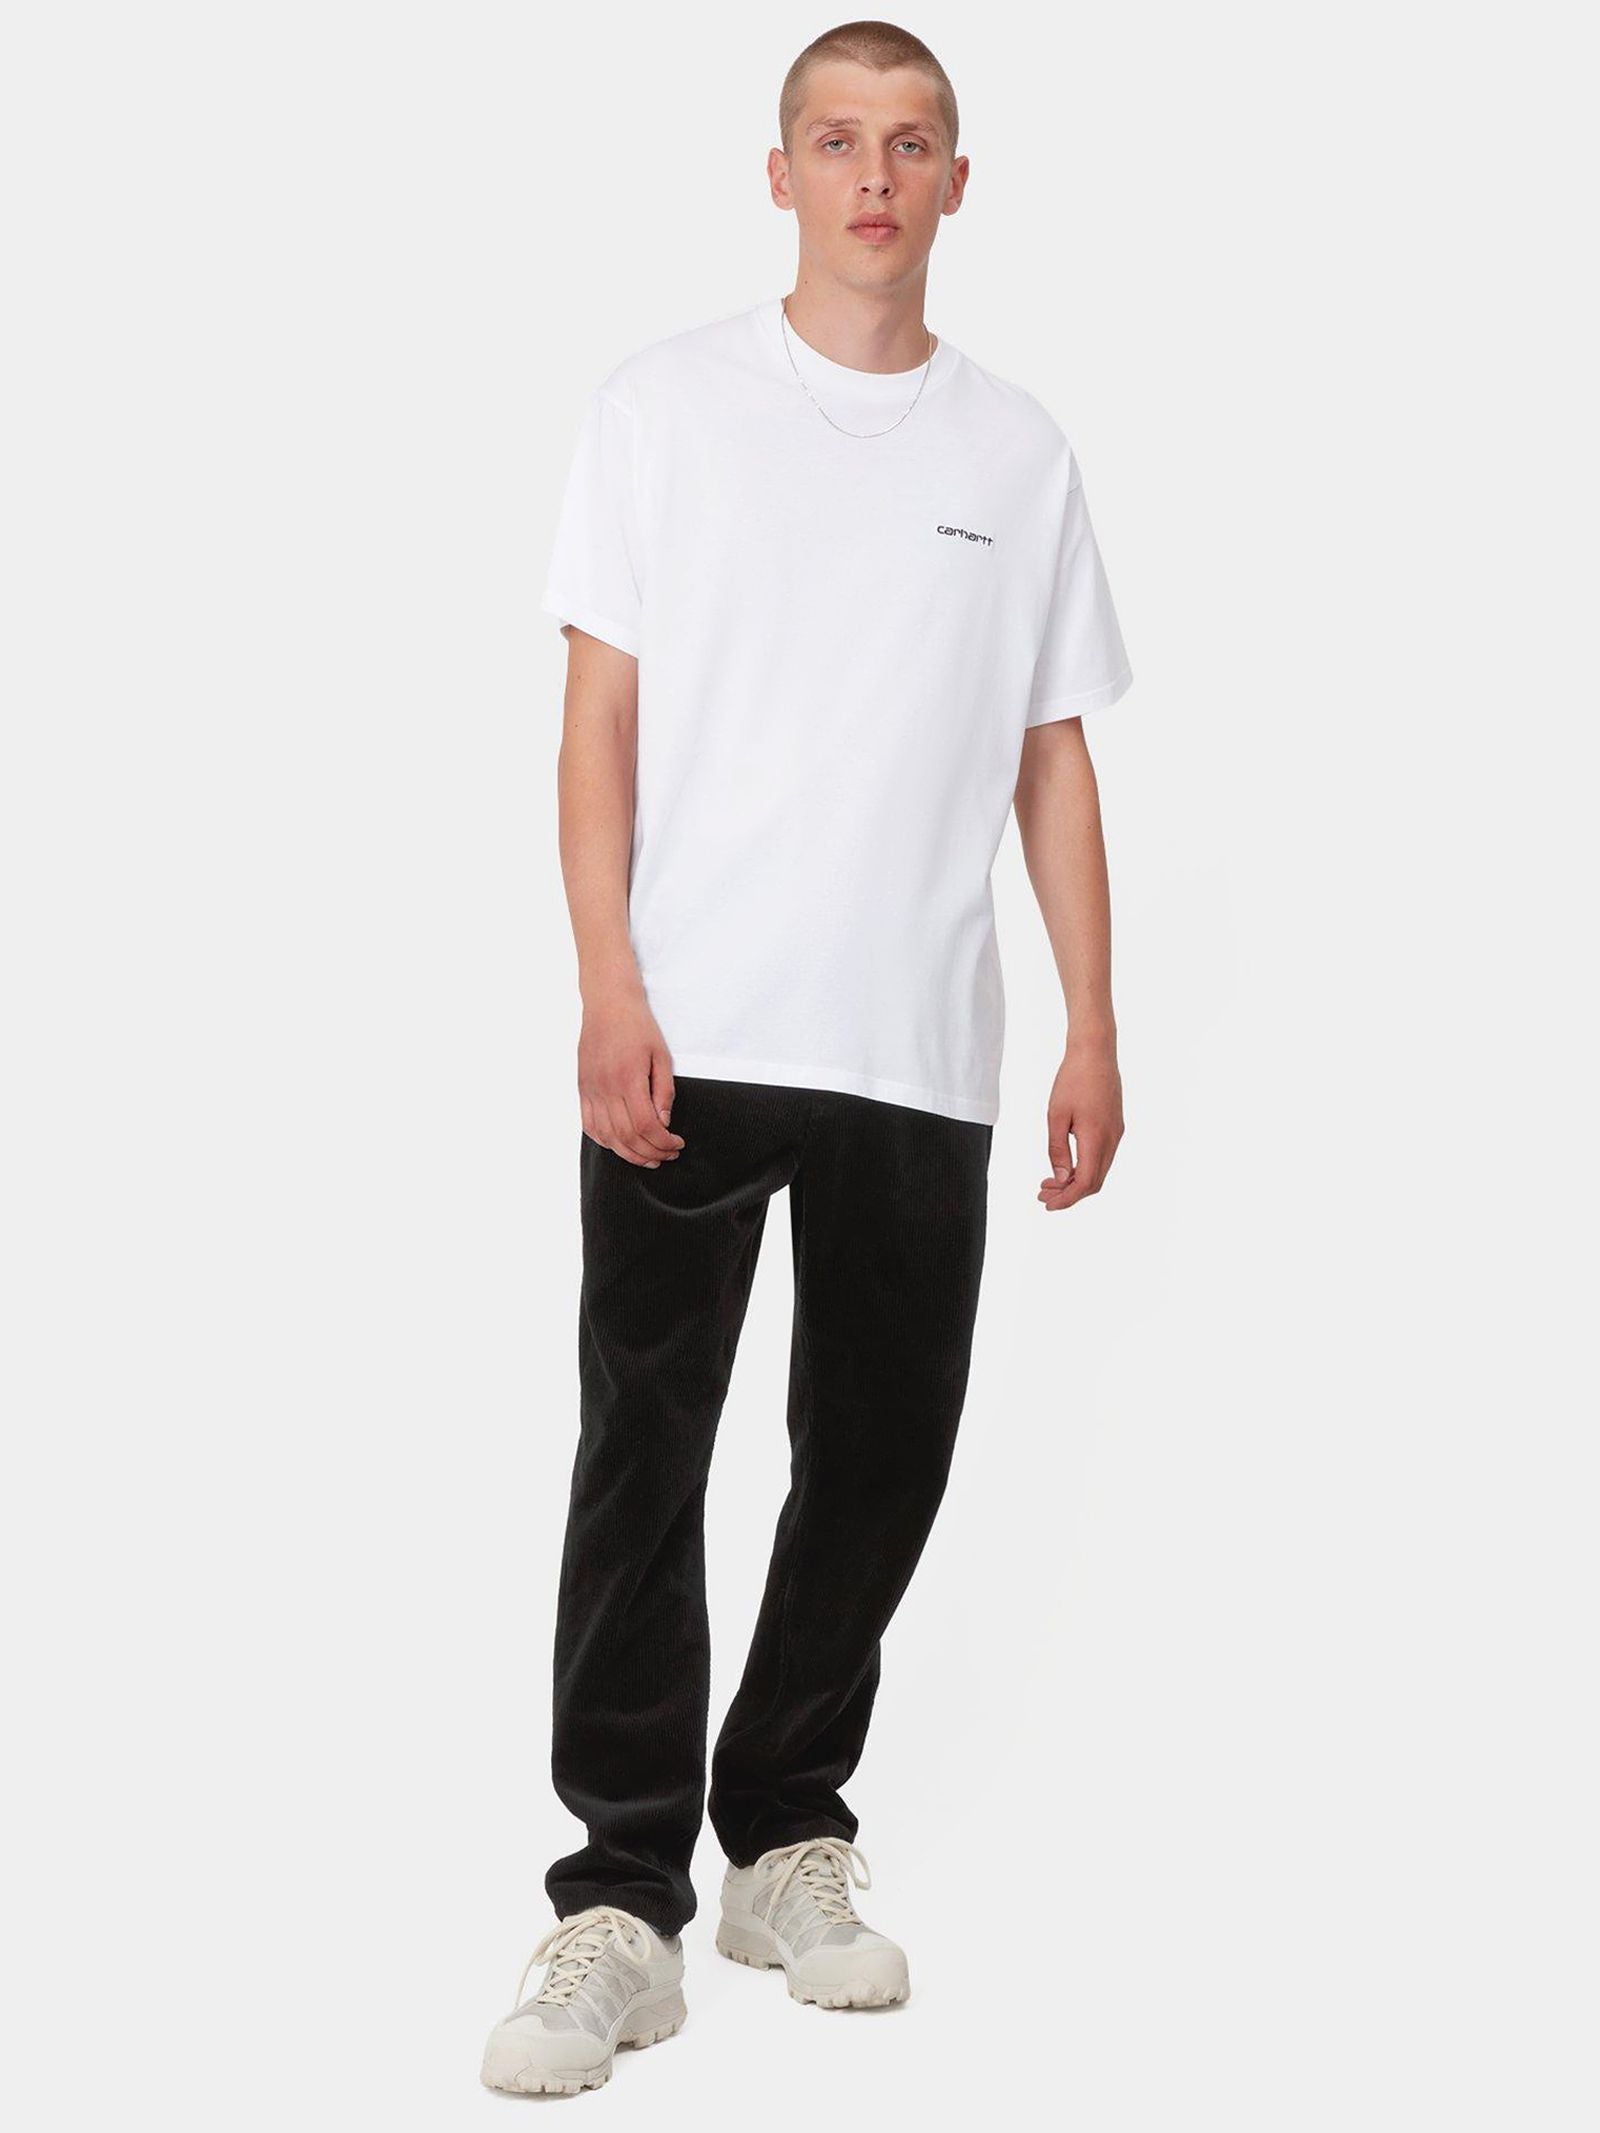 S/S Script Embroidery T-Shirt in Wall/White